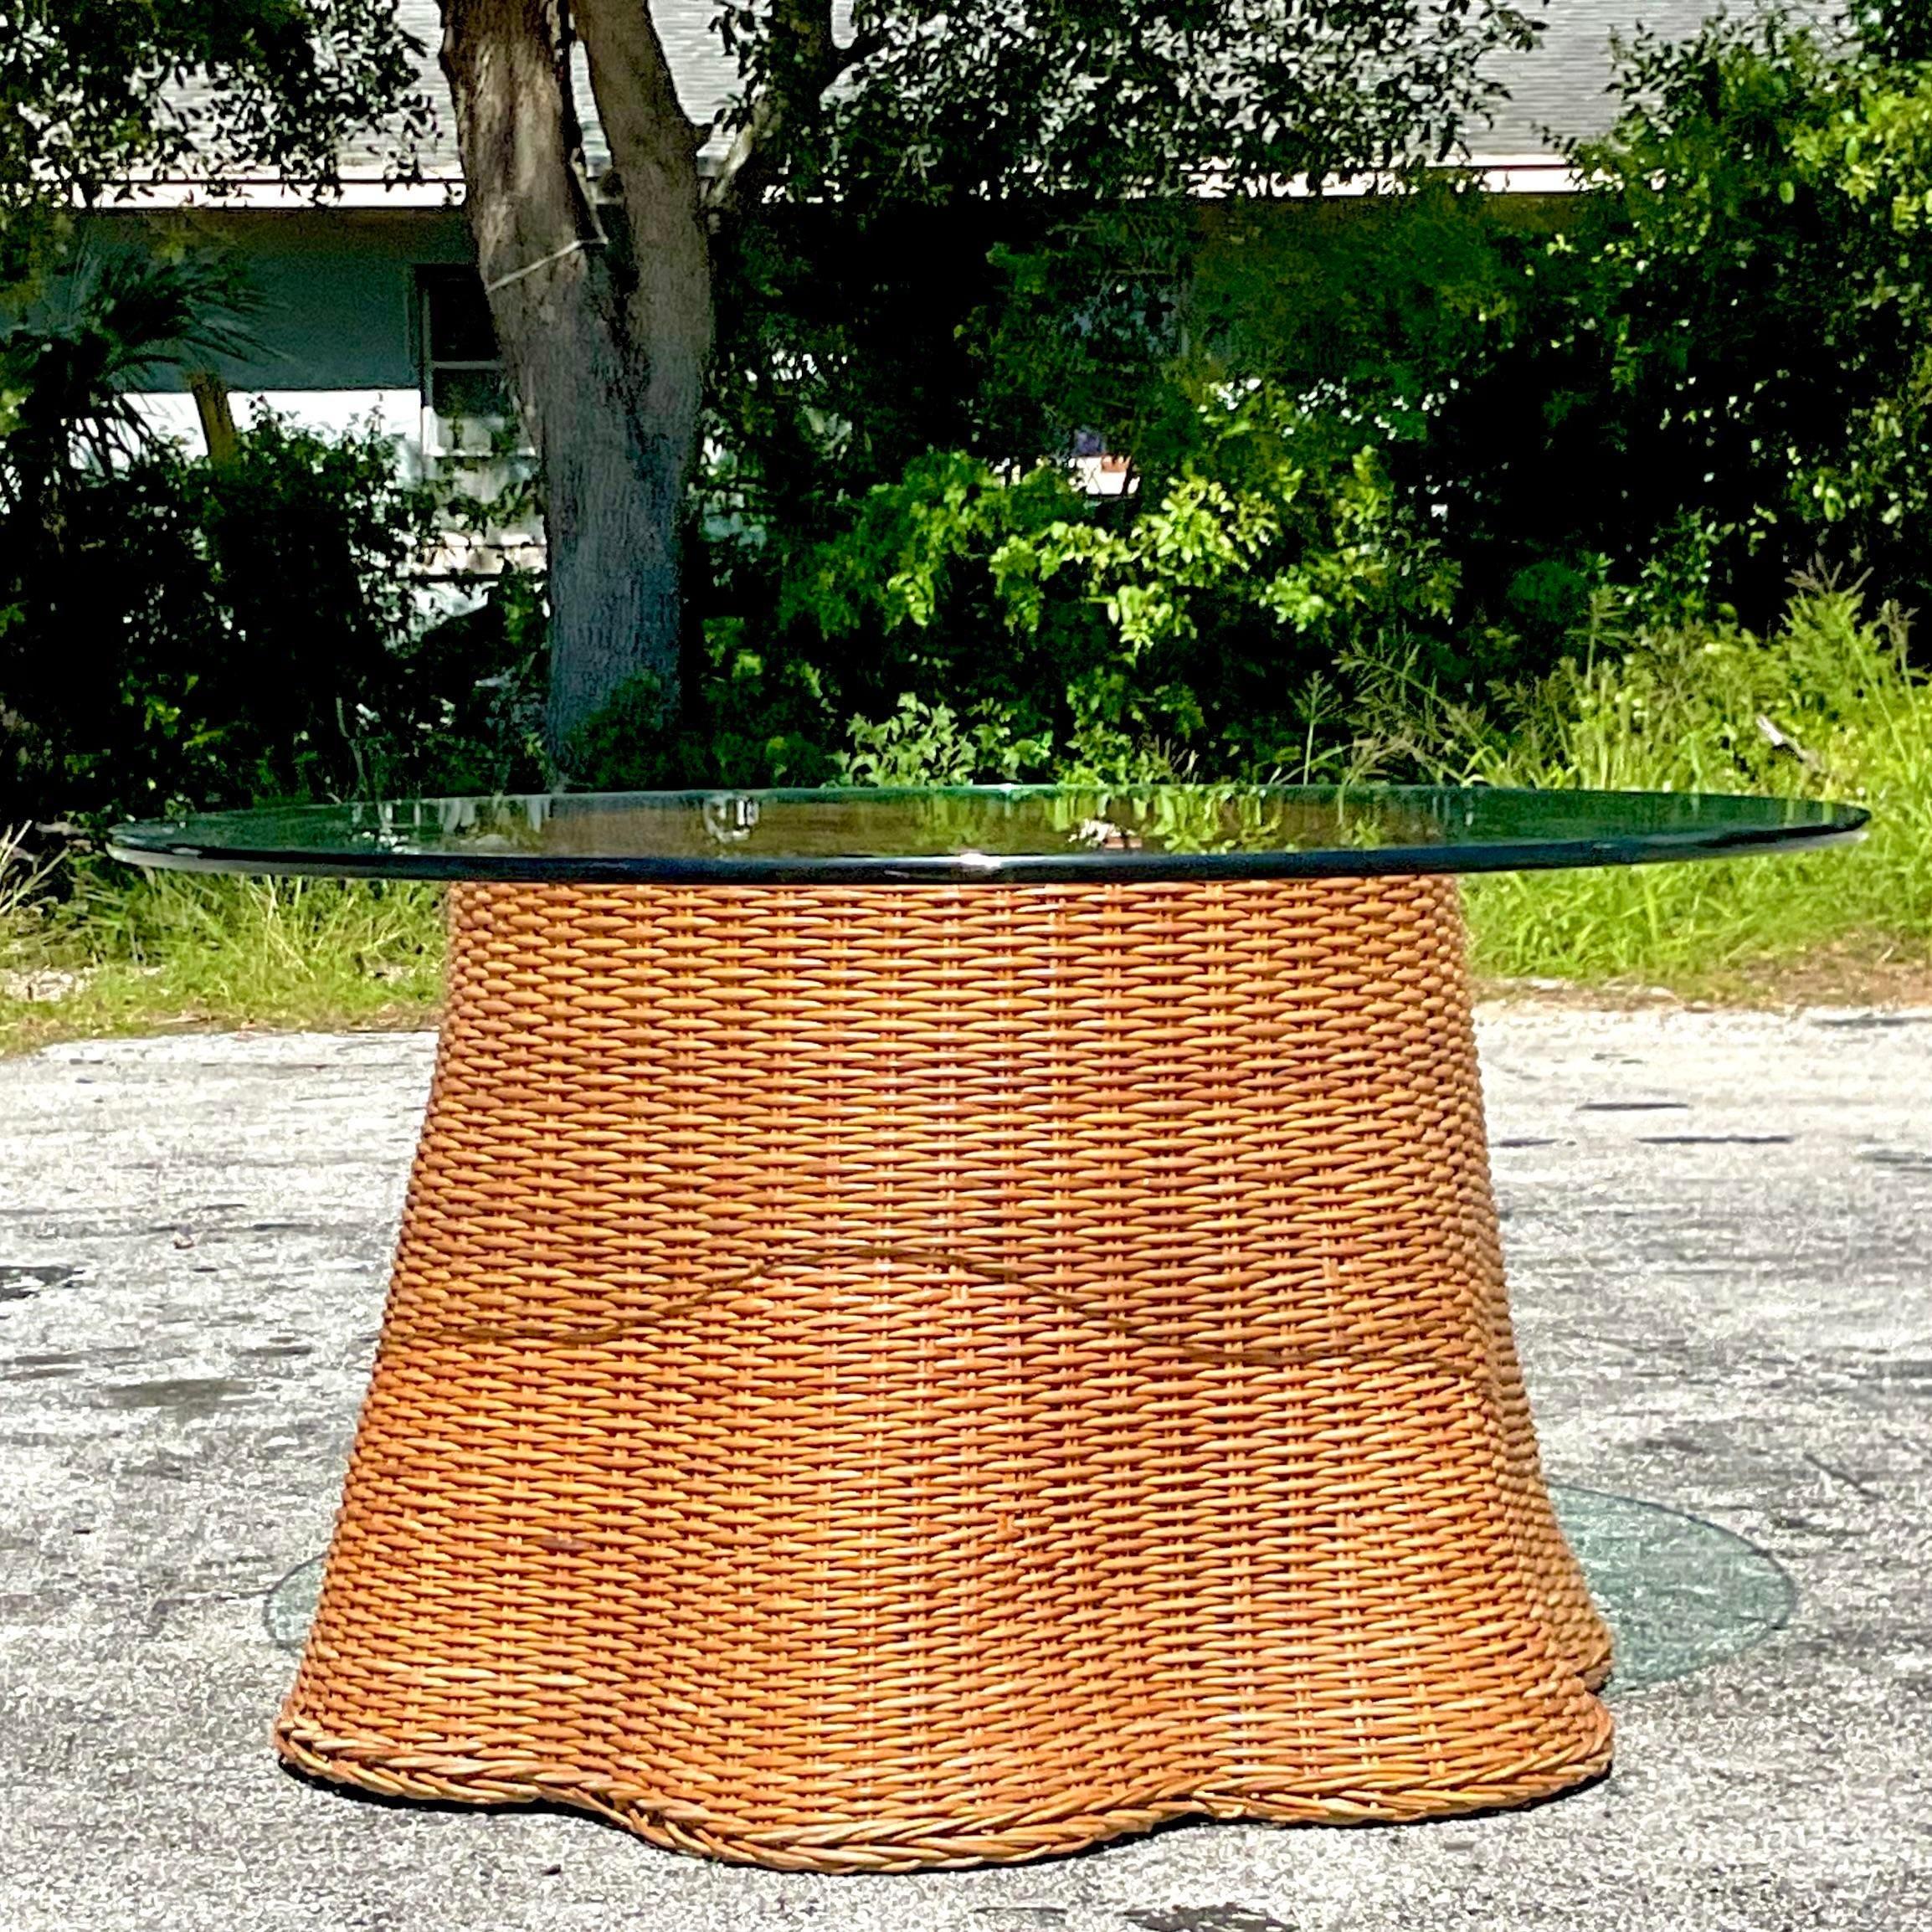 A stunning vintage Coastal center hall table. A chic woven rattan in the coveted ghost shape. A charming little Ruffle along the bottom edge. Acquired from a Palm Beach estate.